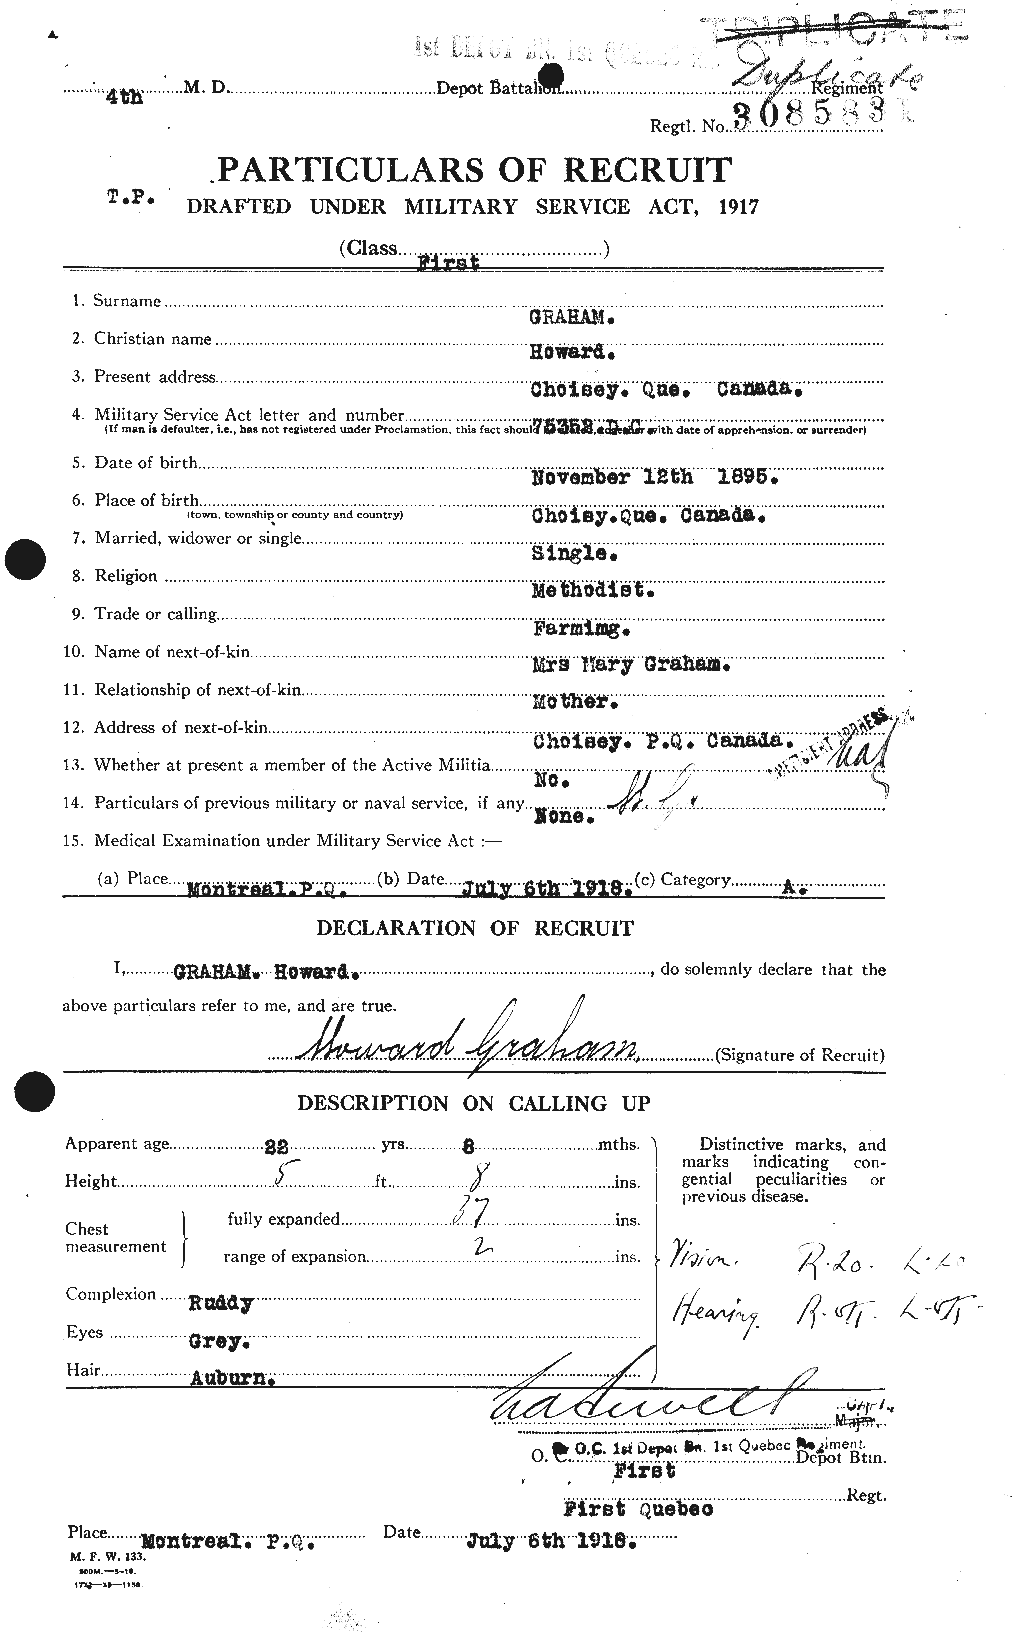 Personnel Records of the First World War - CEF 357748a